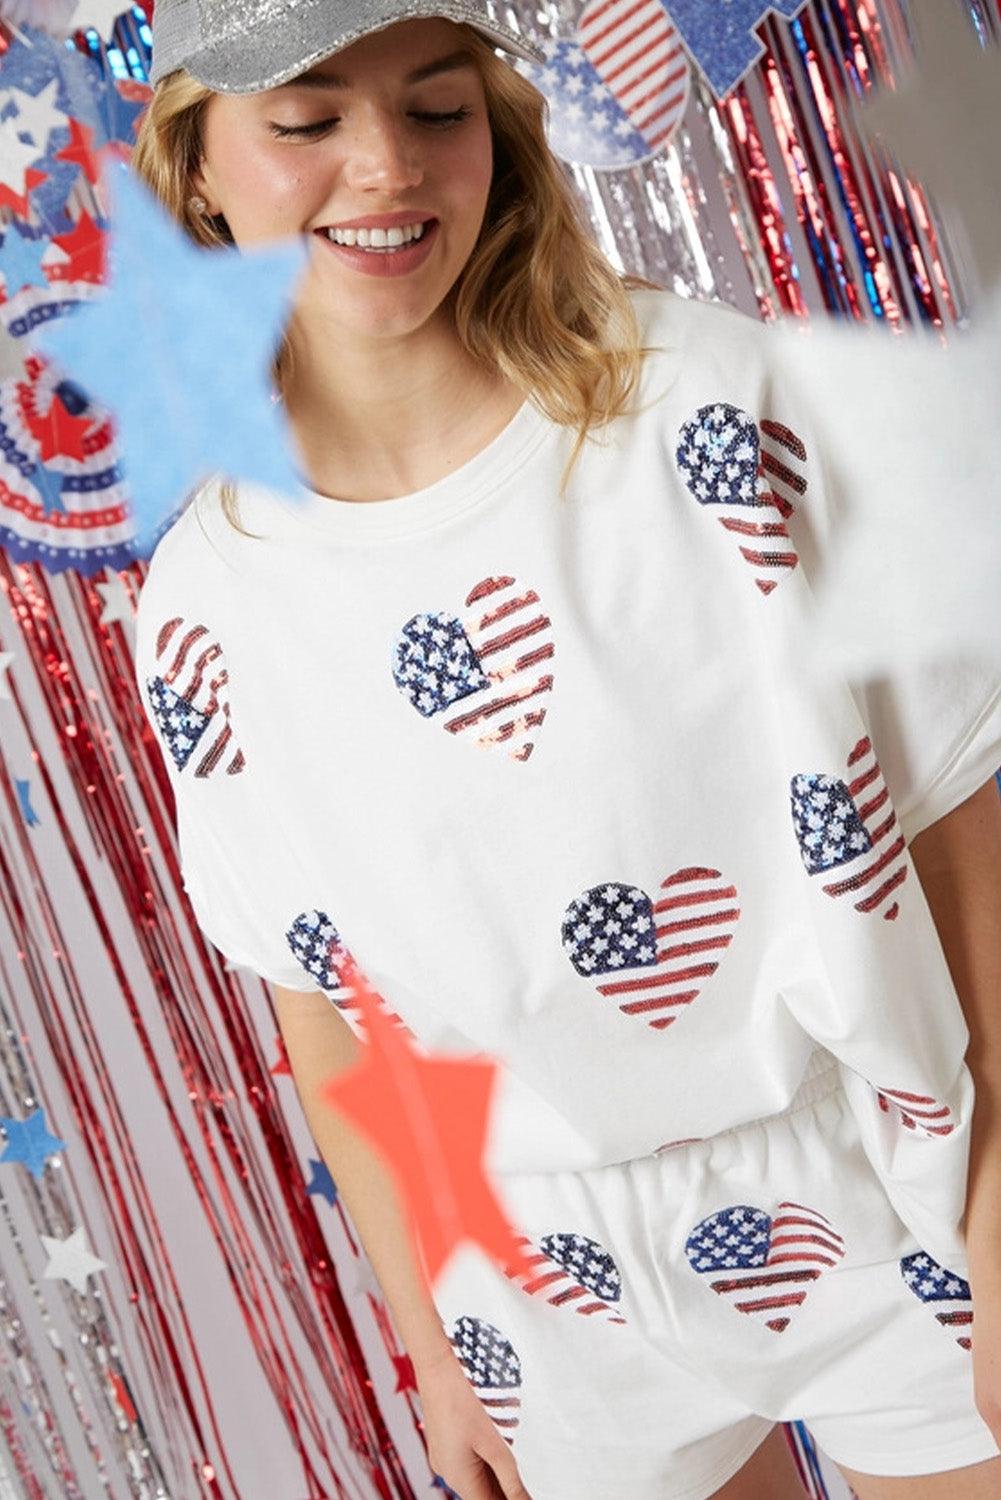 White American Flag Sequin Graphic Loose Top and Short Set - L & M Kee, LLC